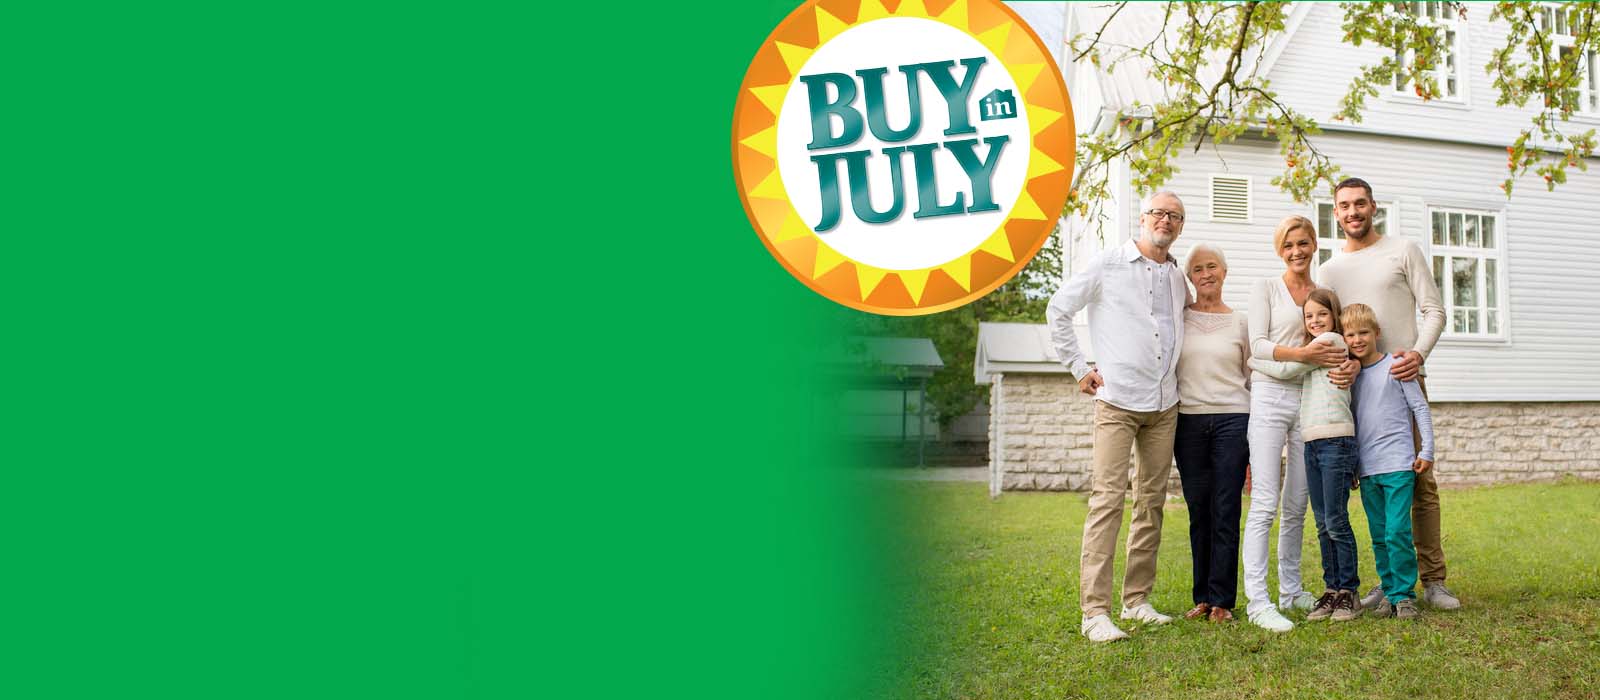 Buy in July logo with a photo of a family standing on the lawn in front of a home.